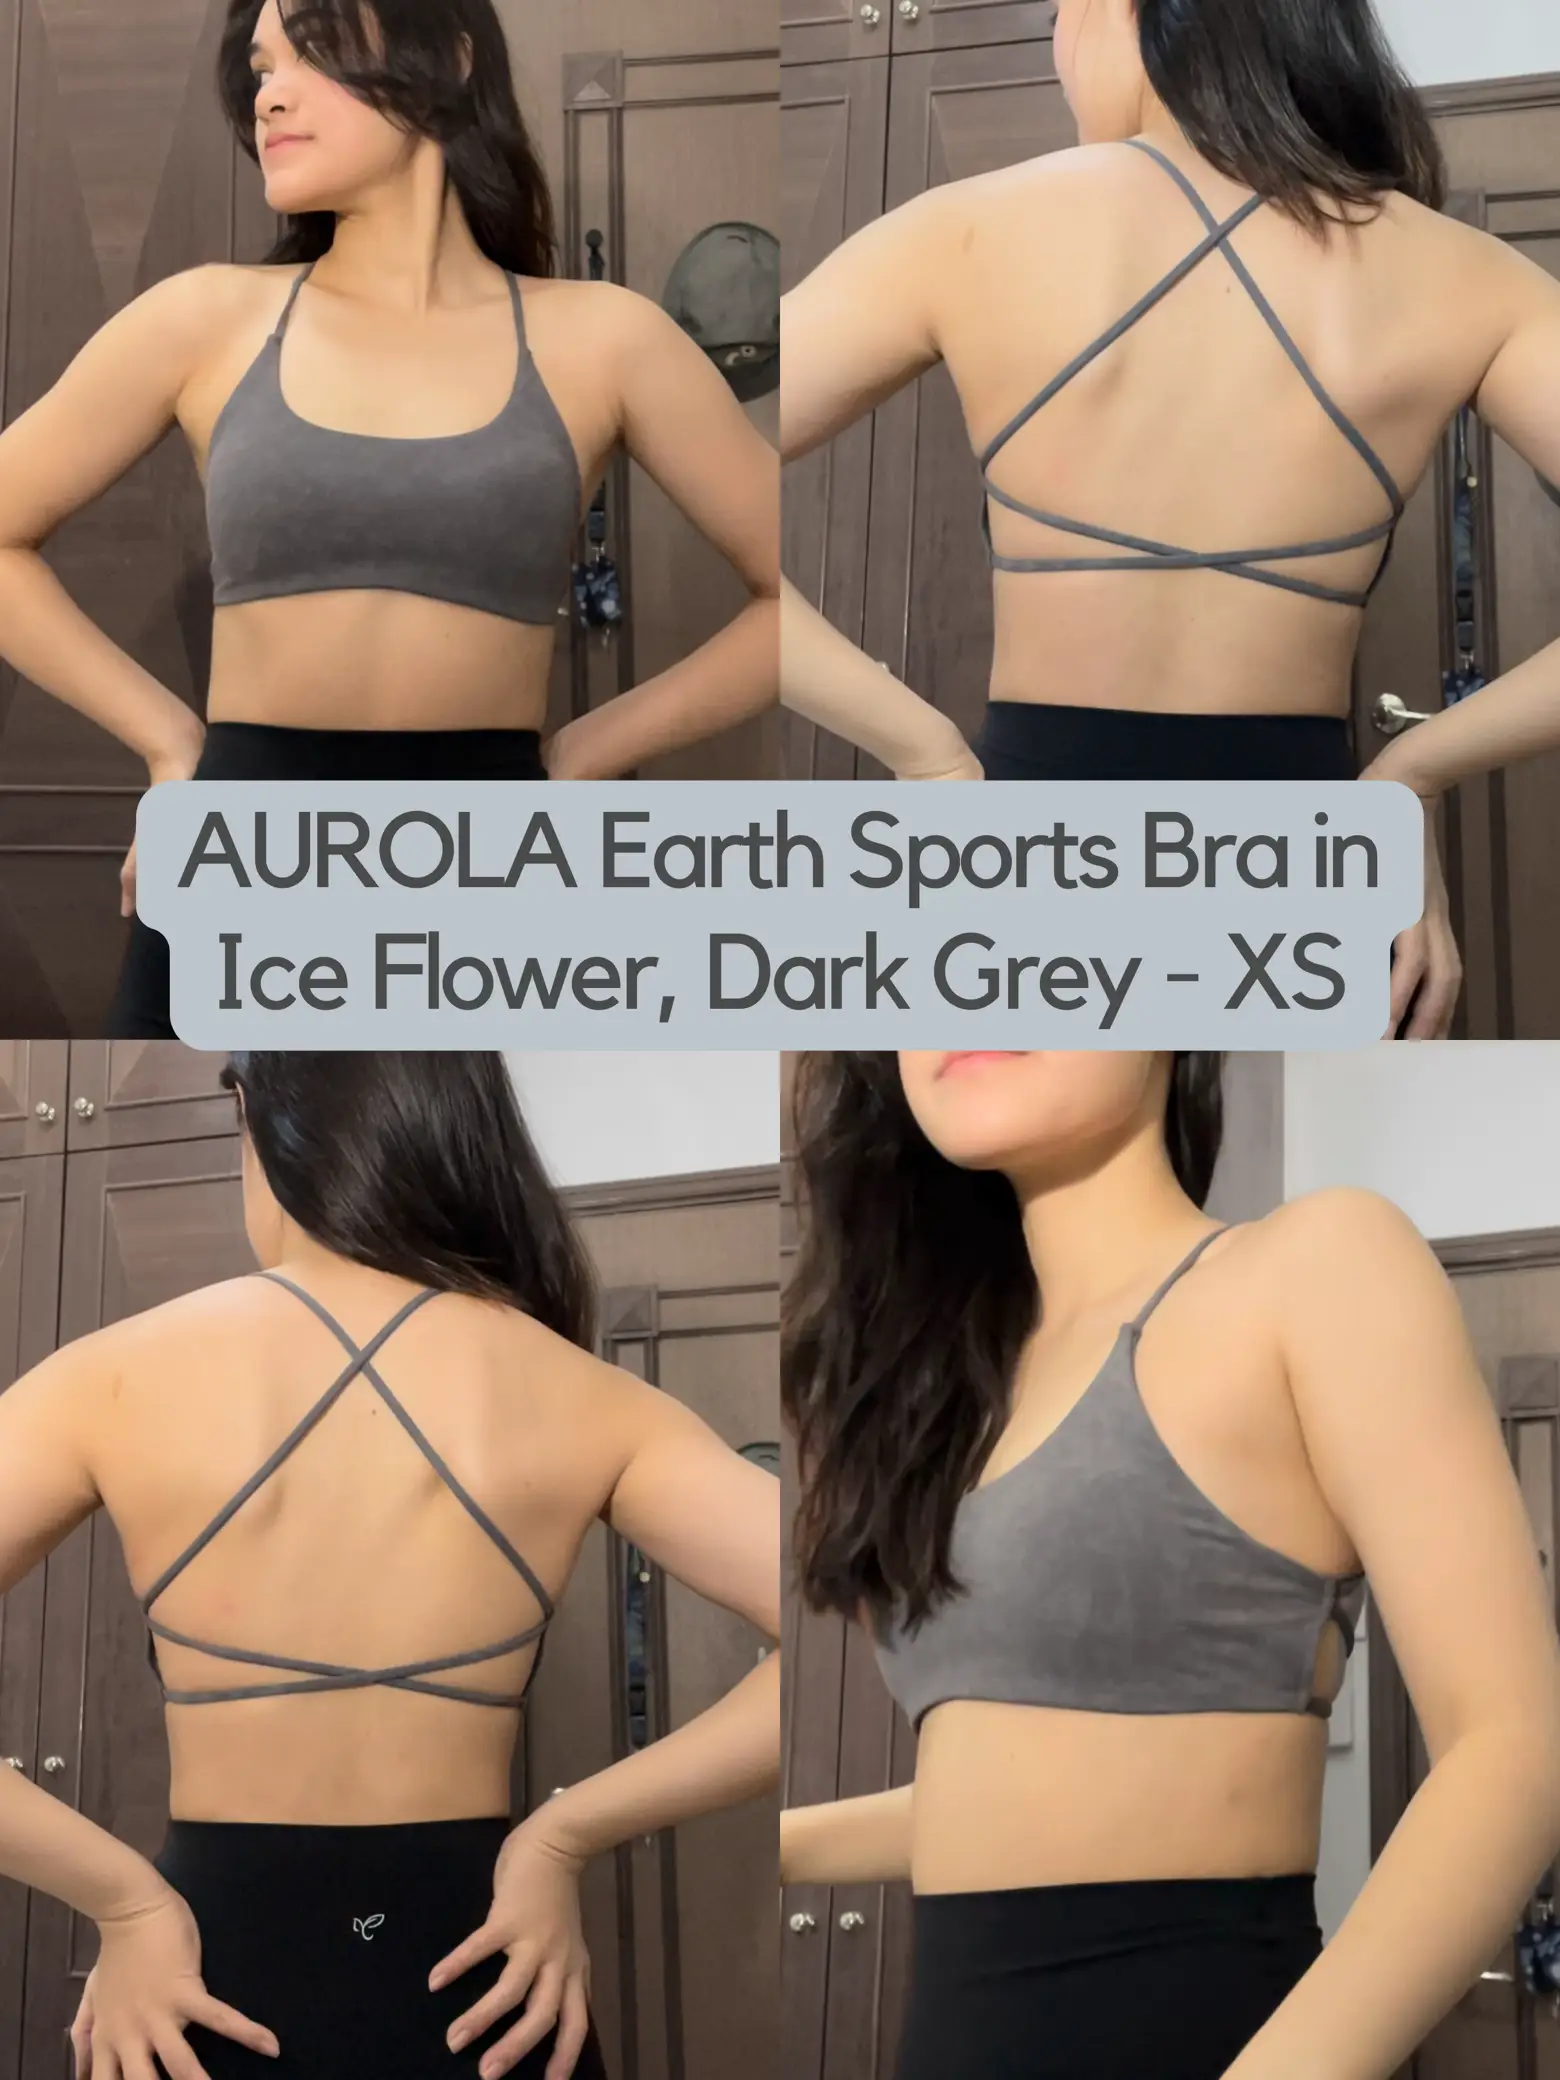 Gym fit of the day 💪🏼 these aurola sports bras are so flattering